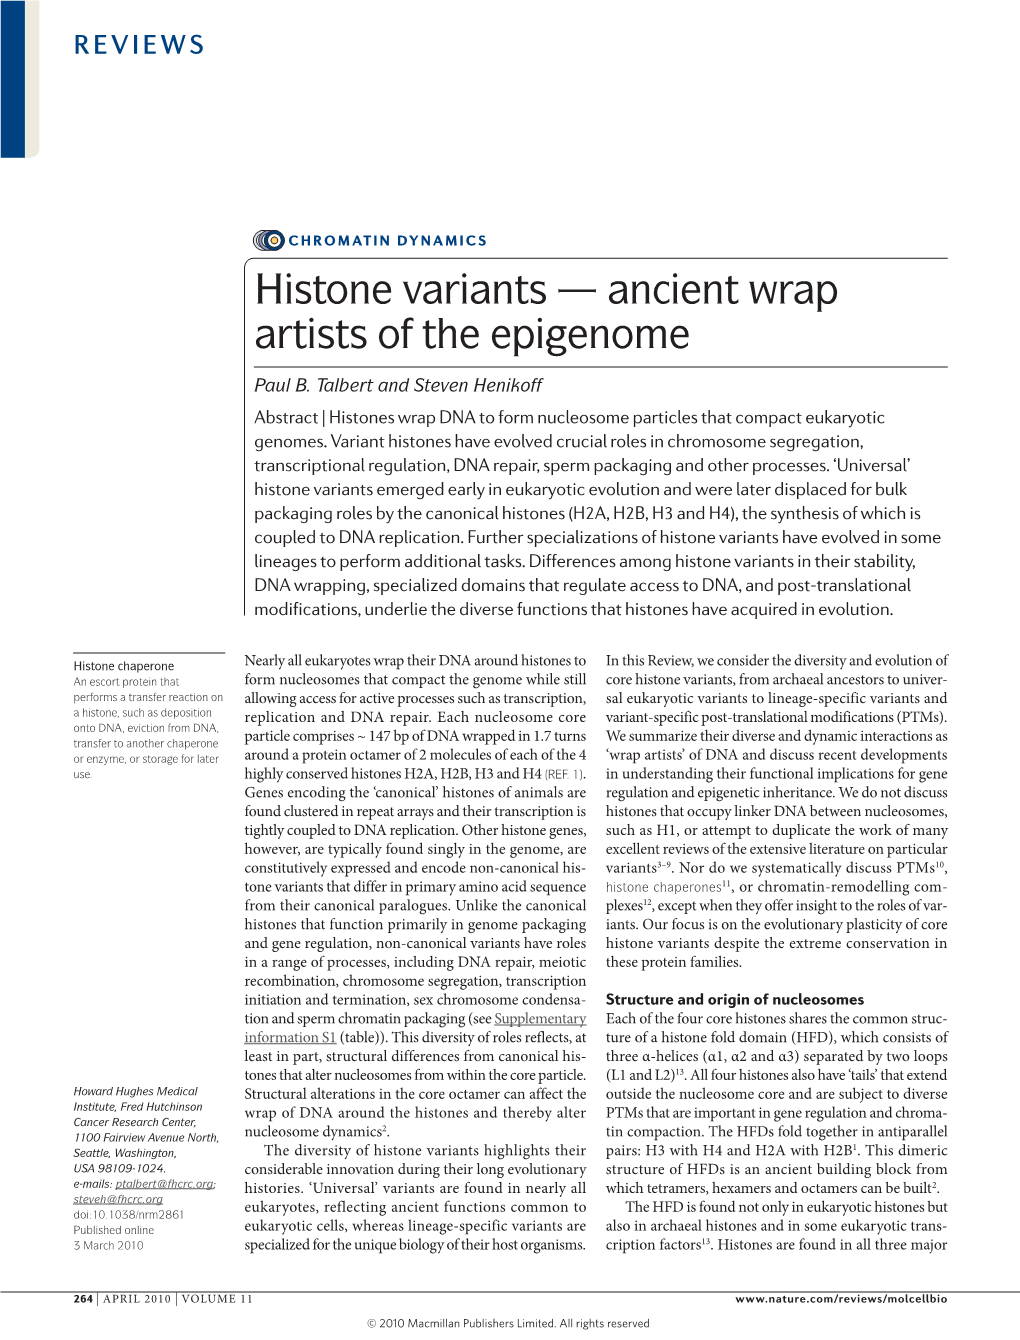 Histone Variants — Ancient Wrap Artists of the Epigenome